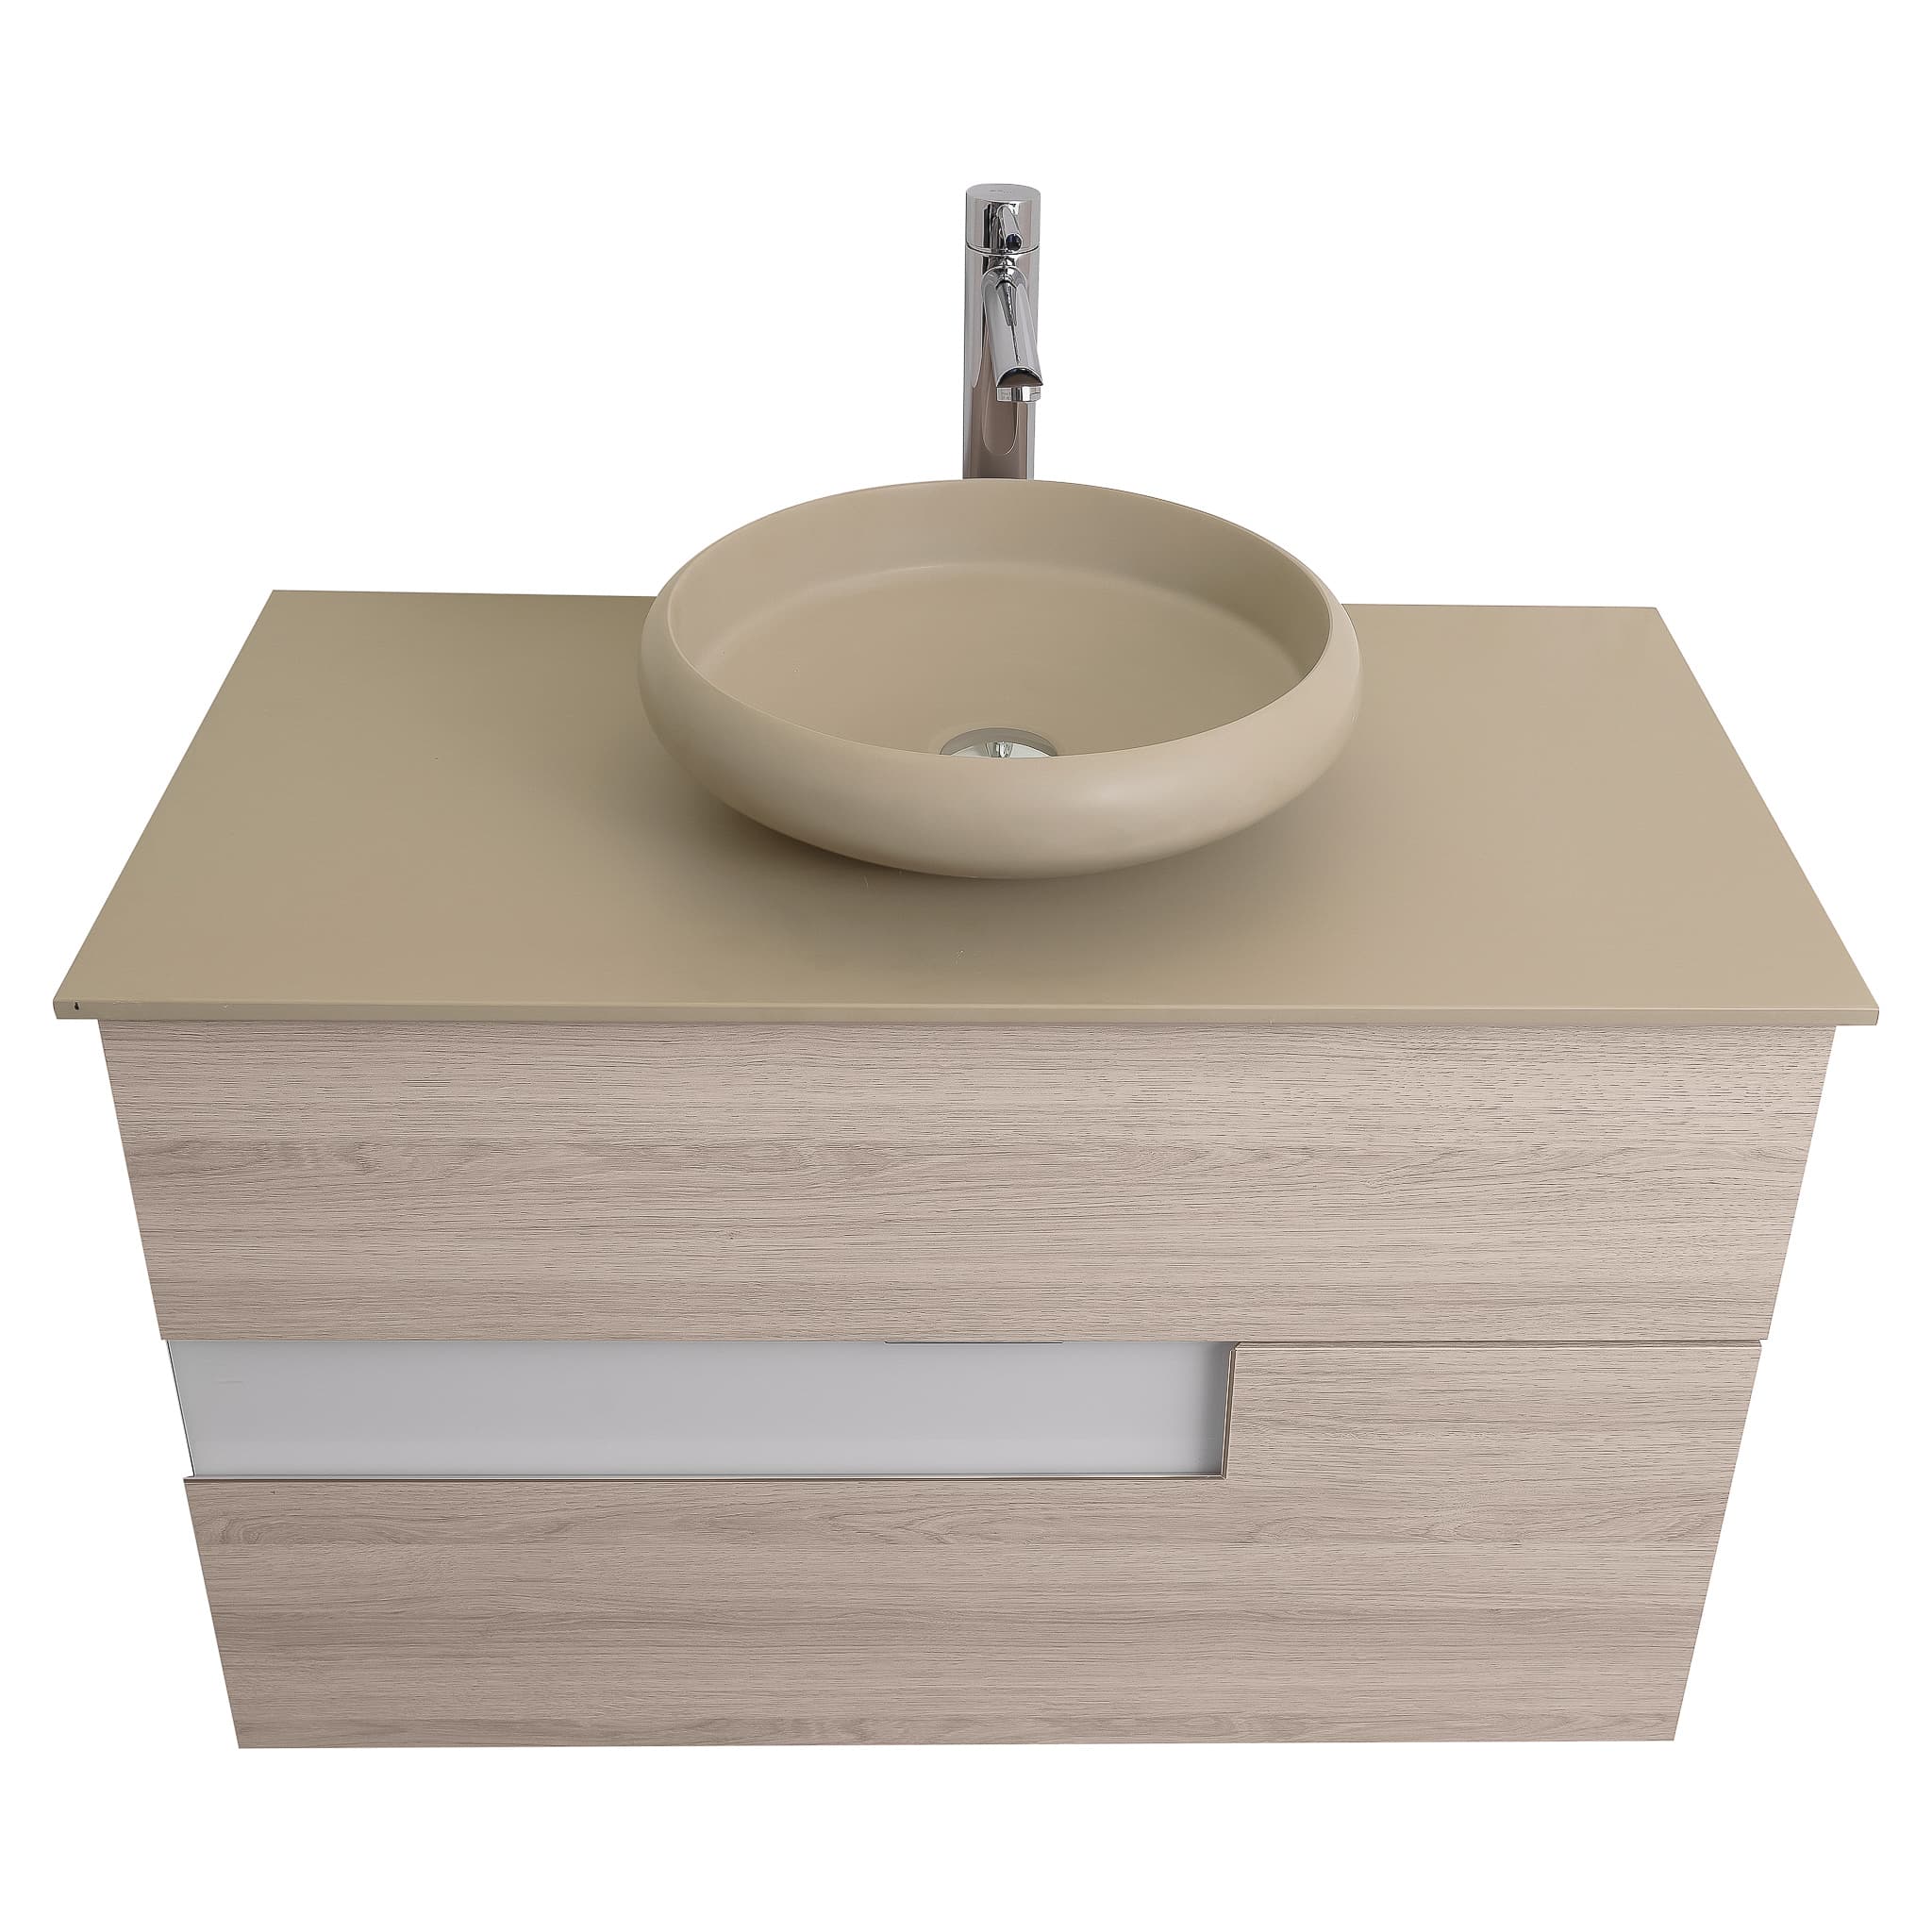 Vision 31.5 Natural Light Wood Cabinet, Solid Surface Flat Taupe Counter And Round Solid Surface Taupe Basin 1153, Wall Mounted Modern Vanity Set